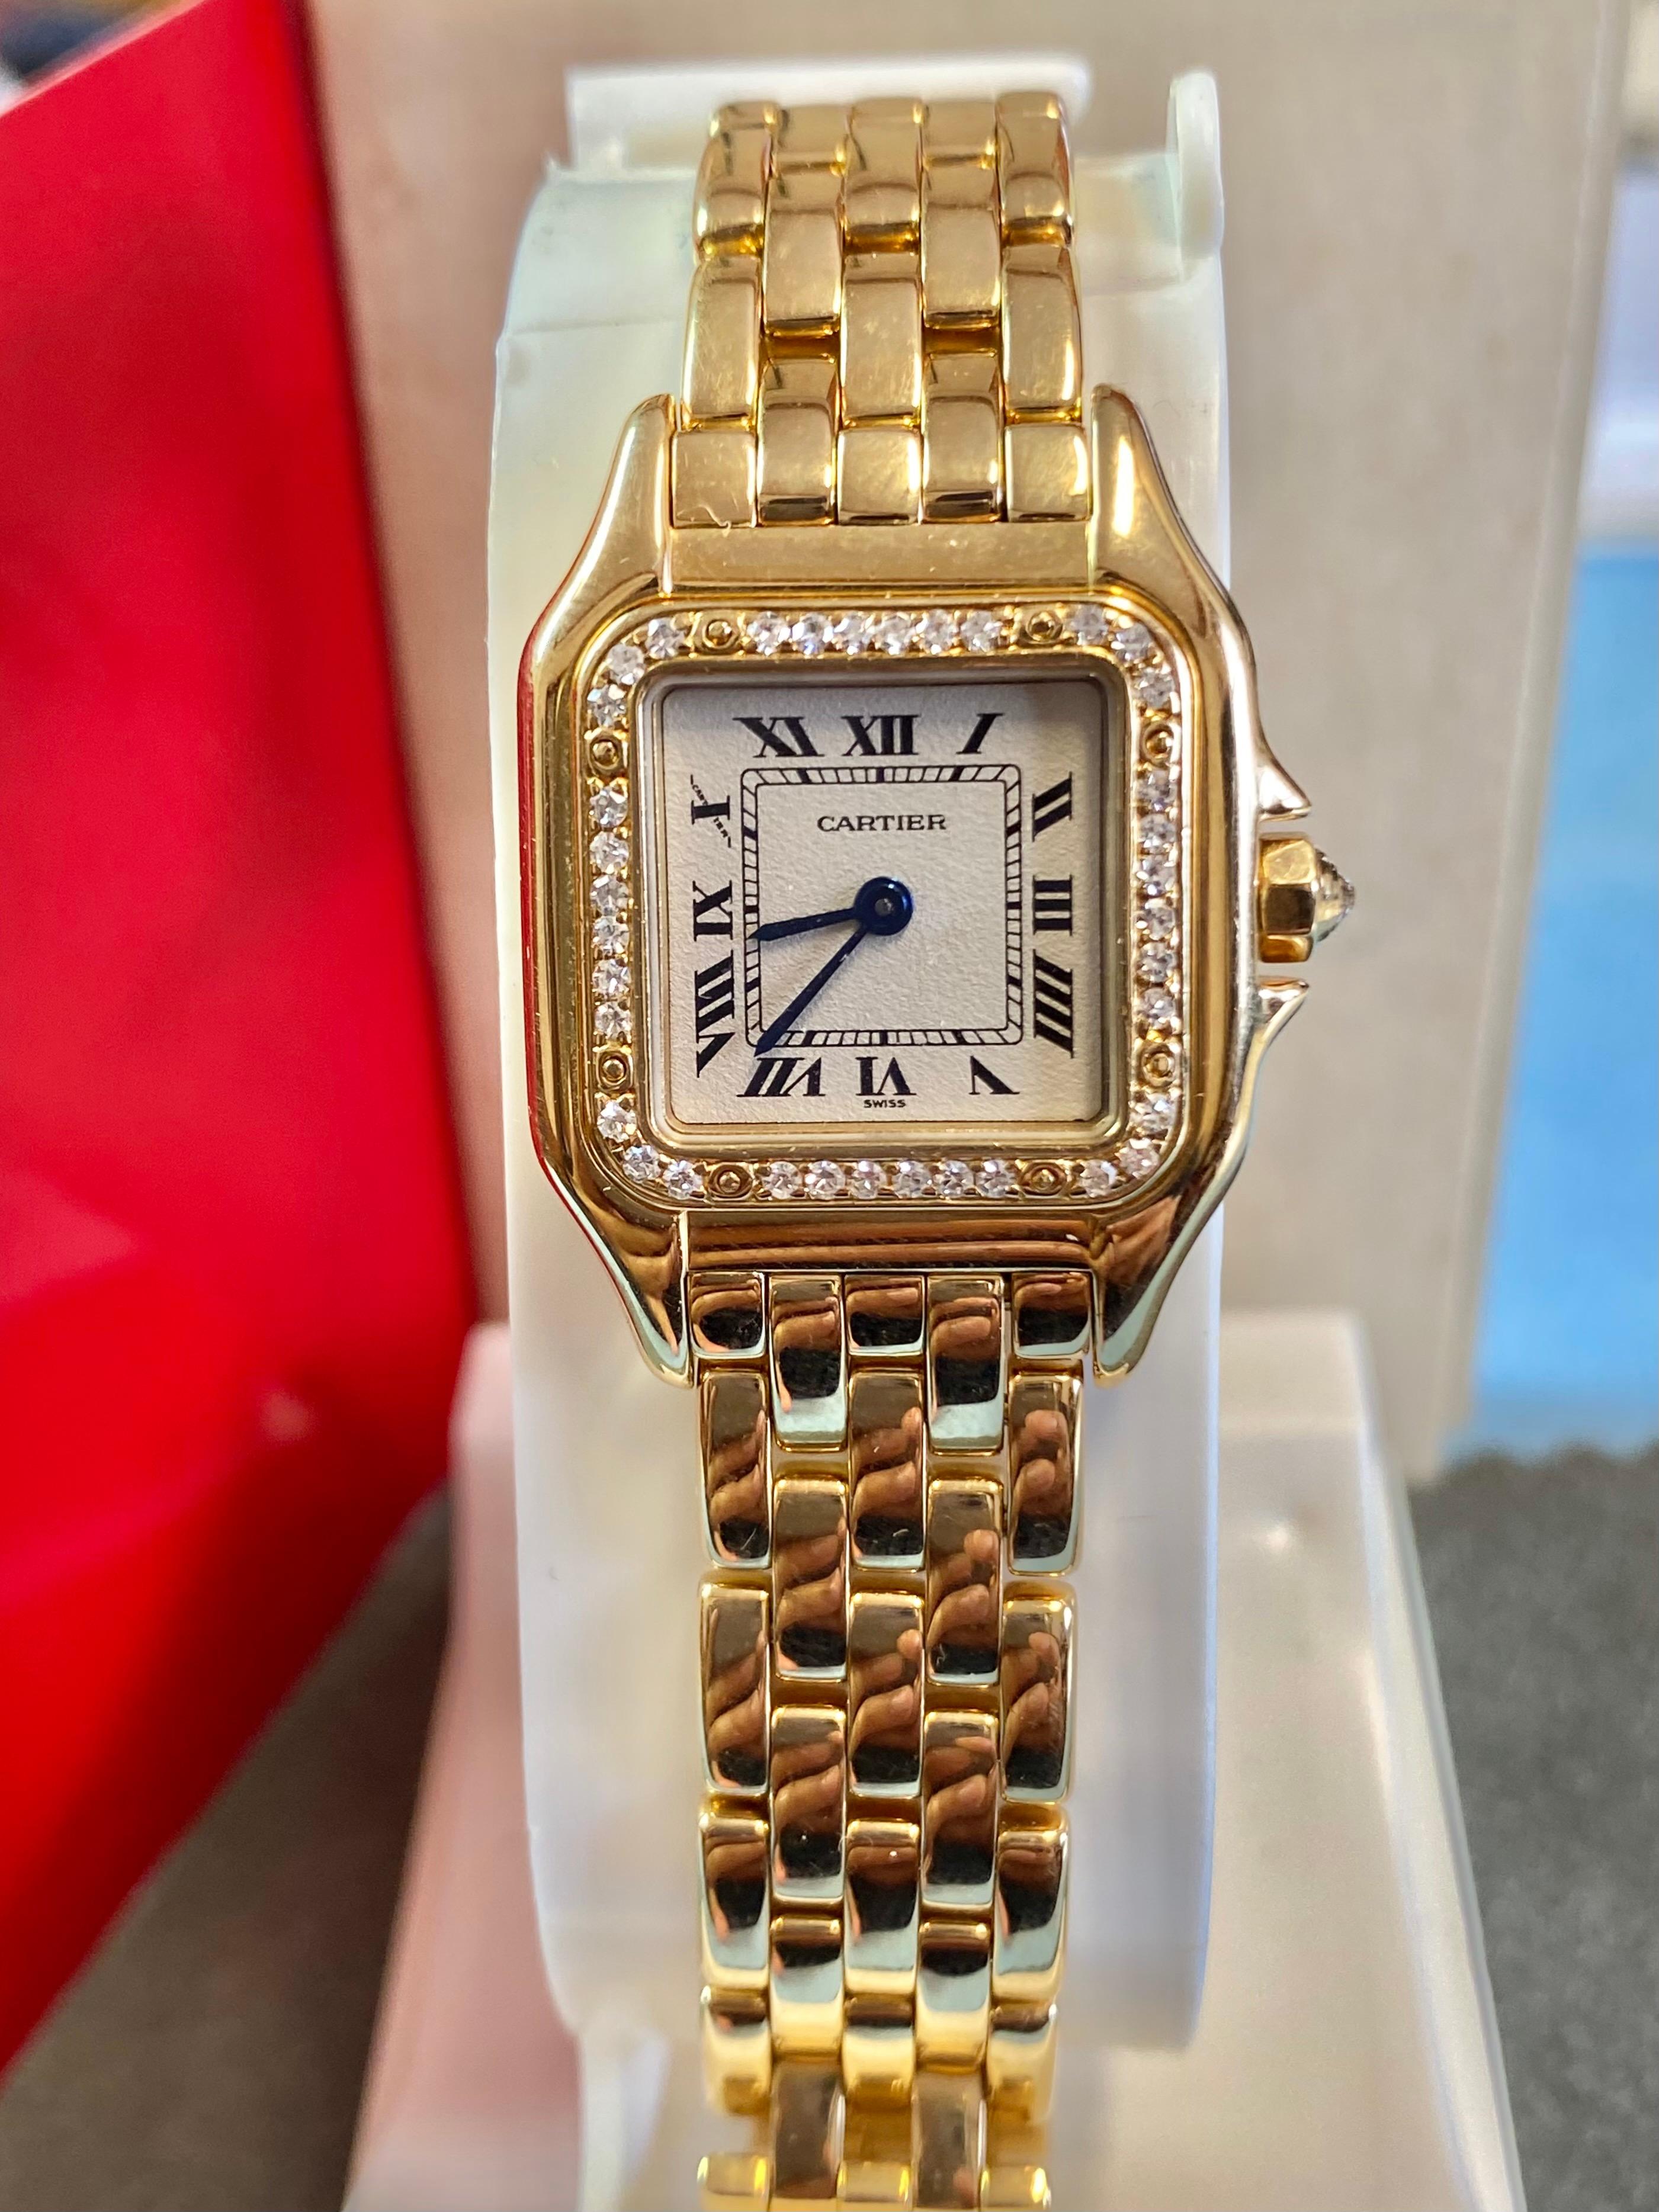 Cartier Panthere Ladies Wristwatch in 18k Gold with Cartier Diamond Bezel 7